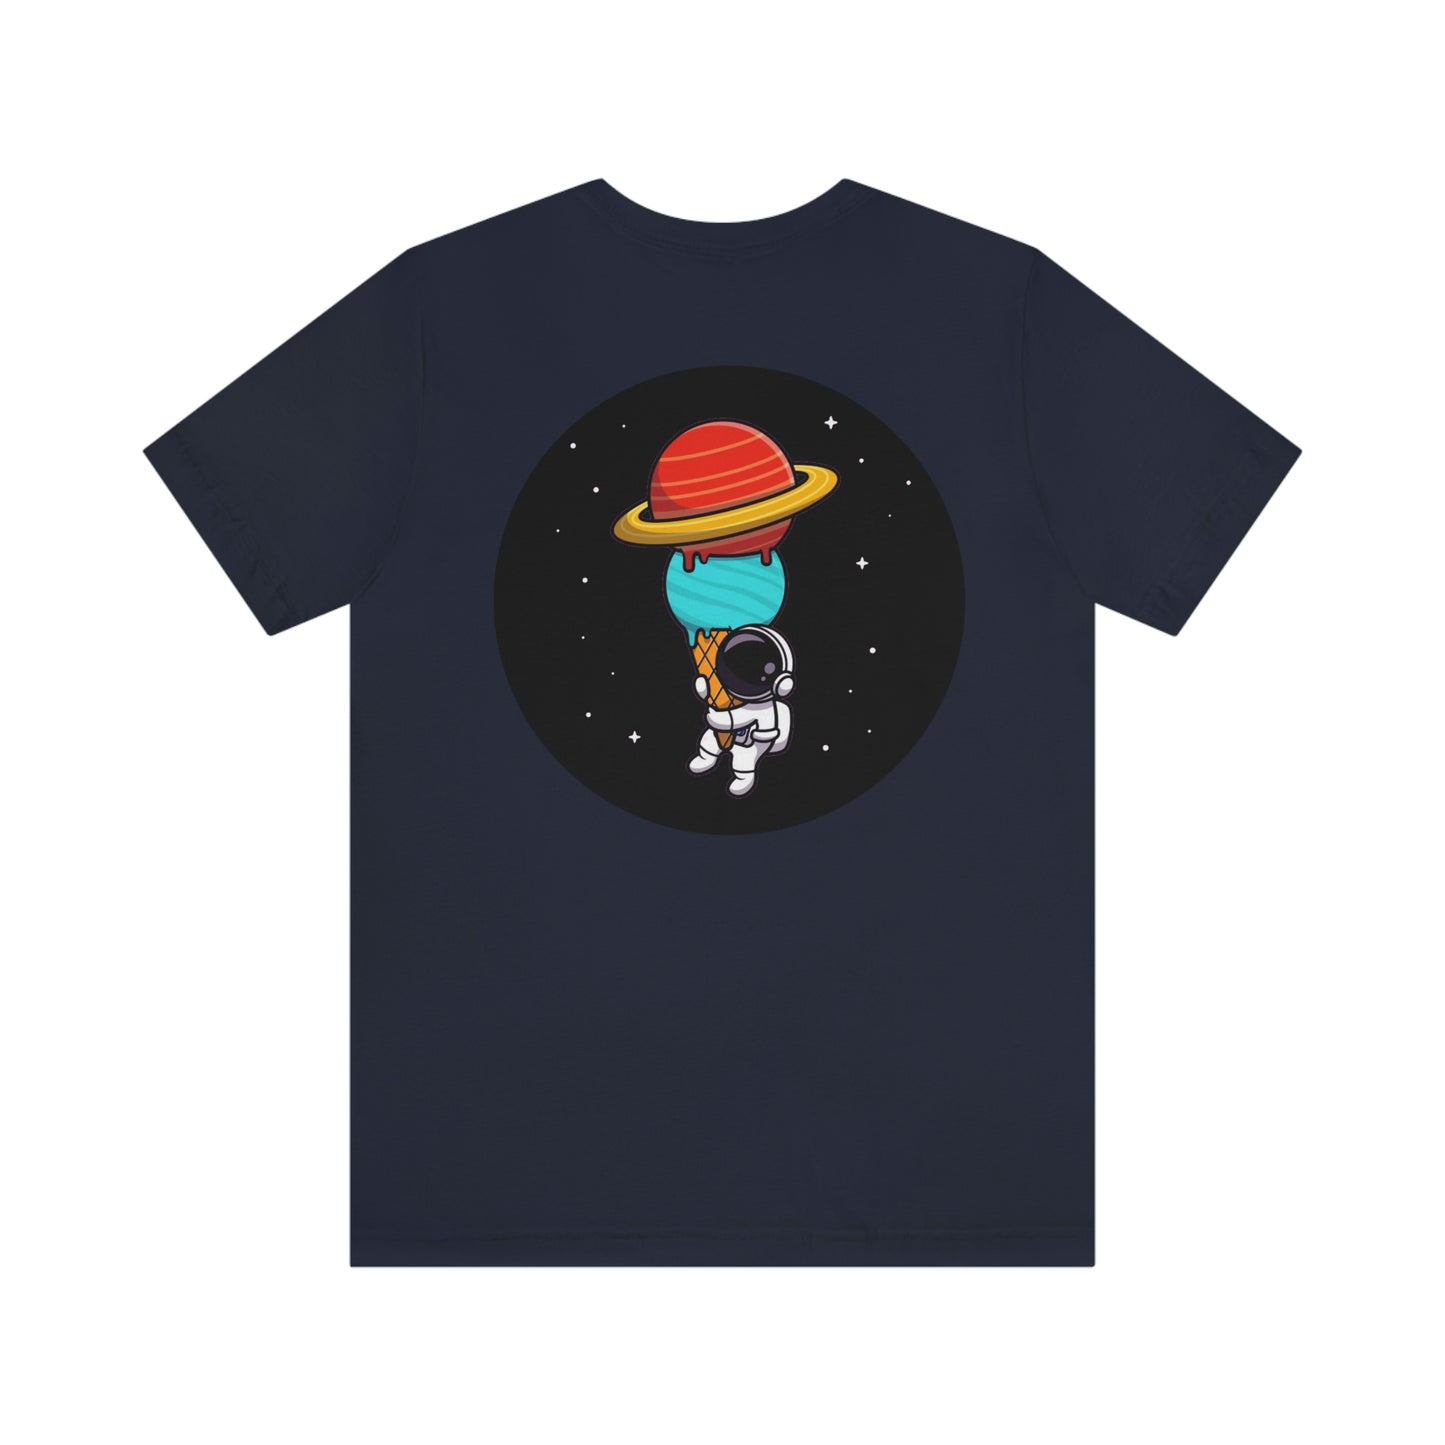 A Comfortable Tee Experience the Comfort of Space with Our Astronaut Spacewalk Ice Cream Adventure Unisex T-Shirt